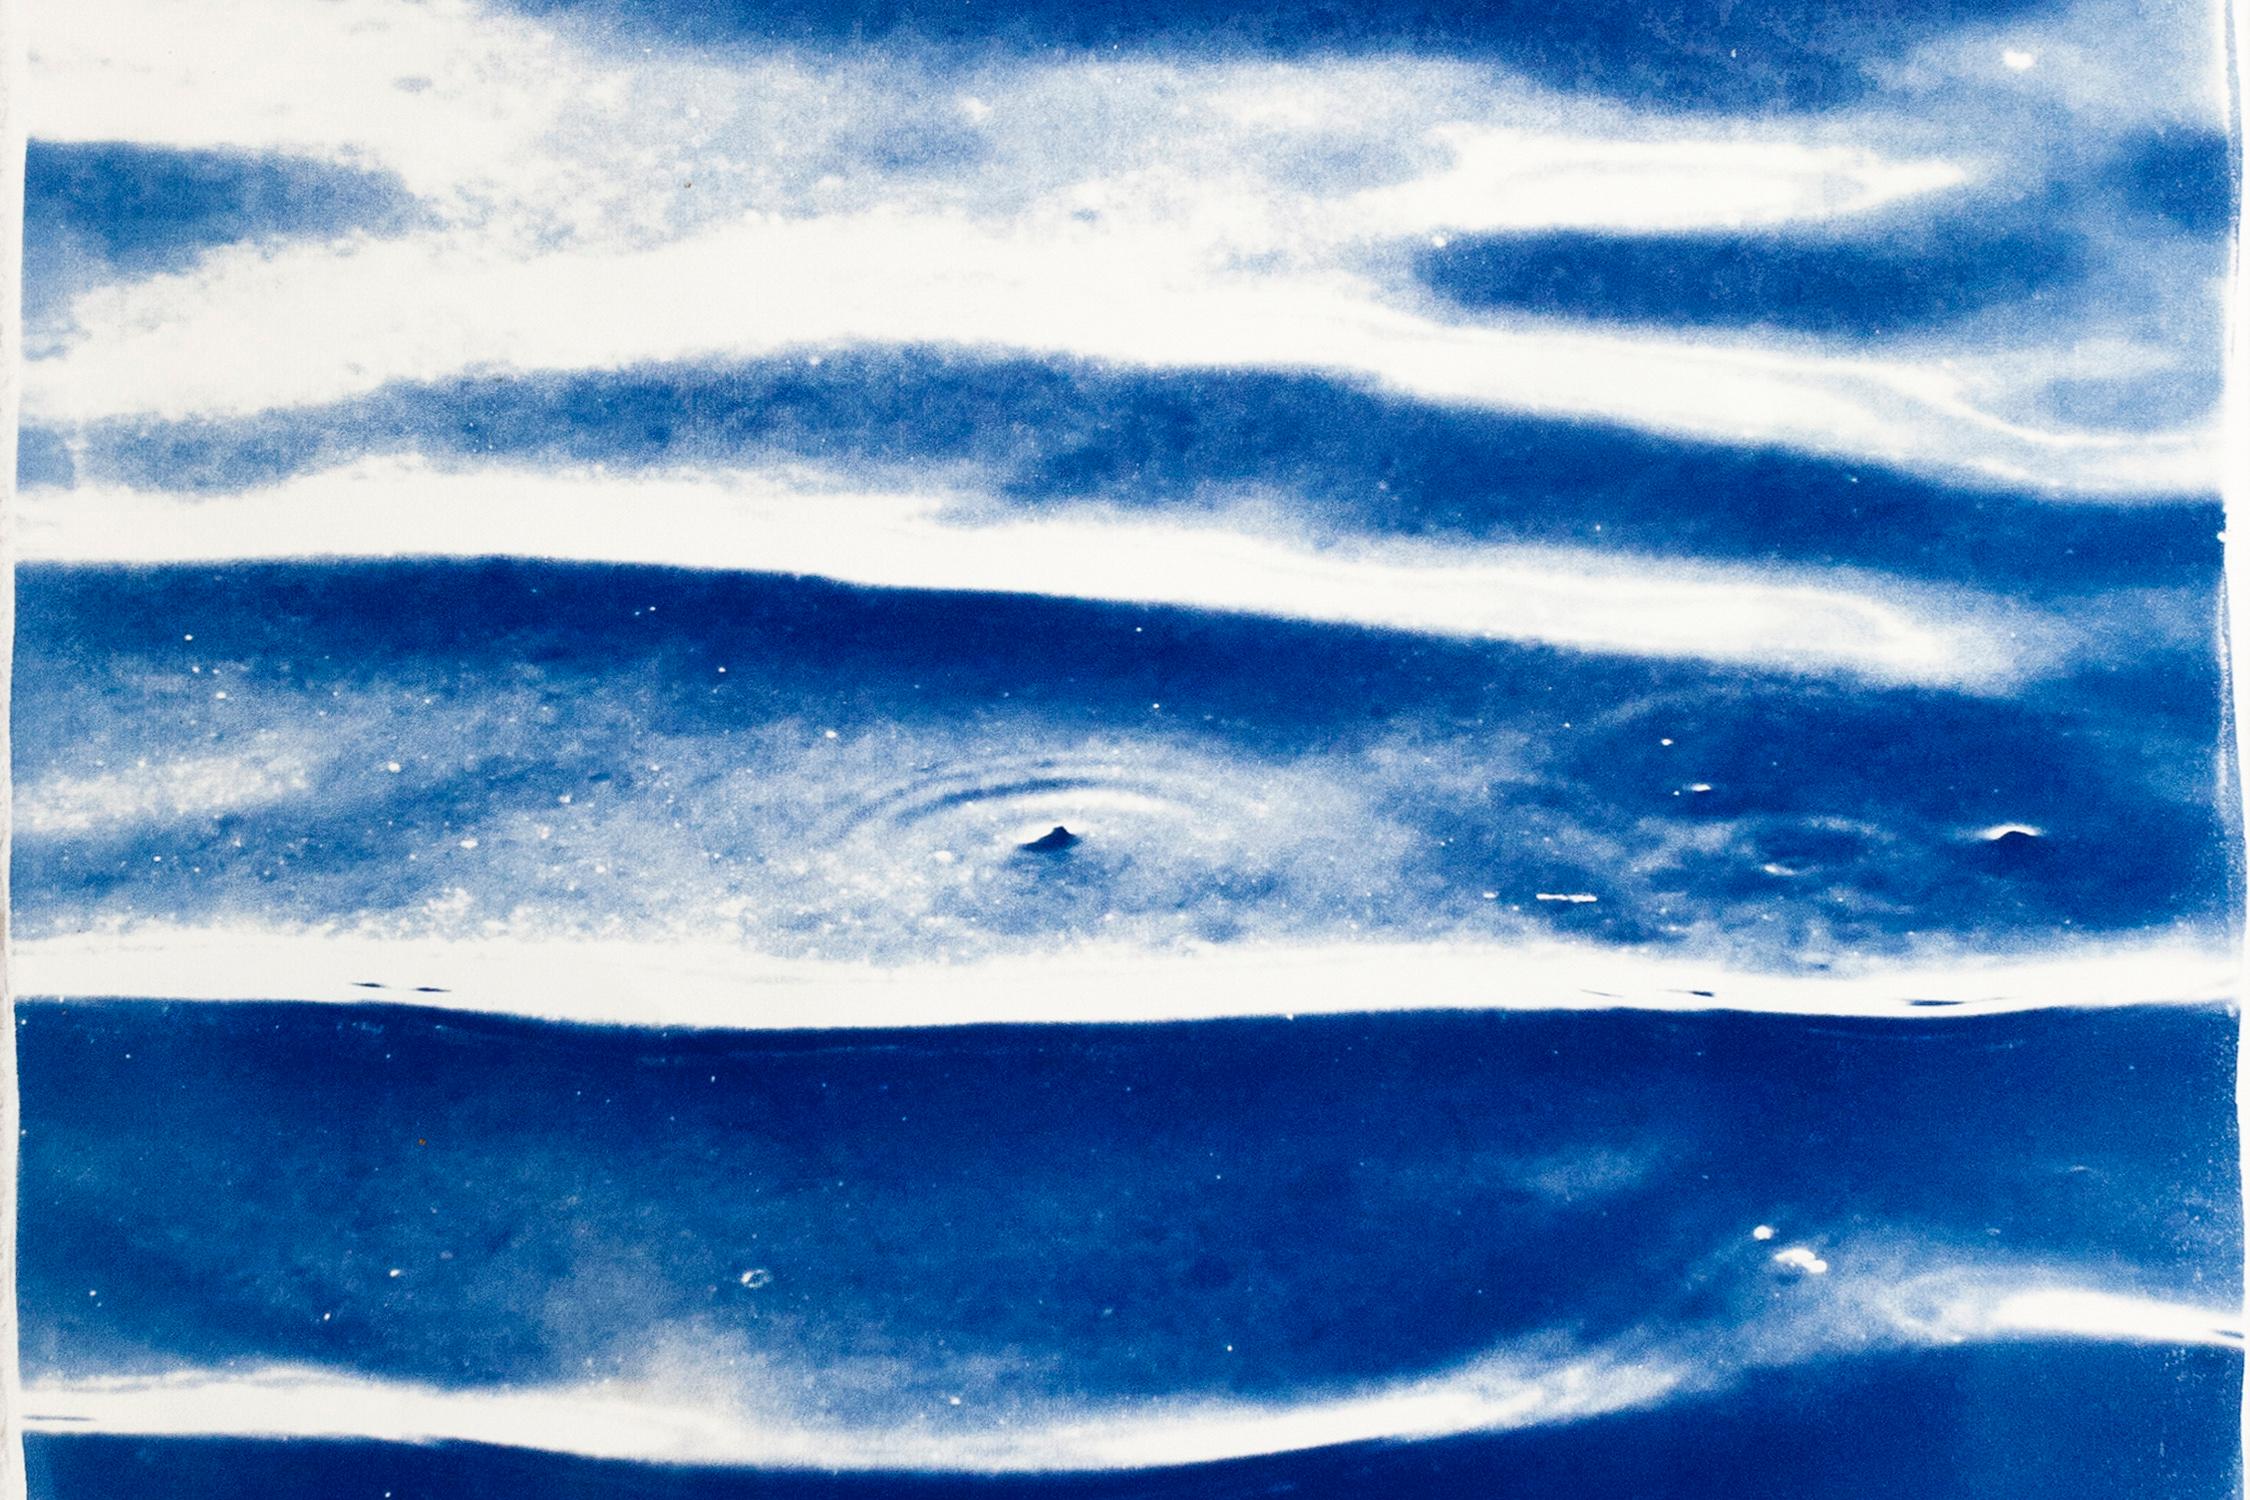 This is an exclusive handprinted limited edition cyanotype.
This diptych is titled 